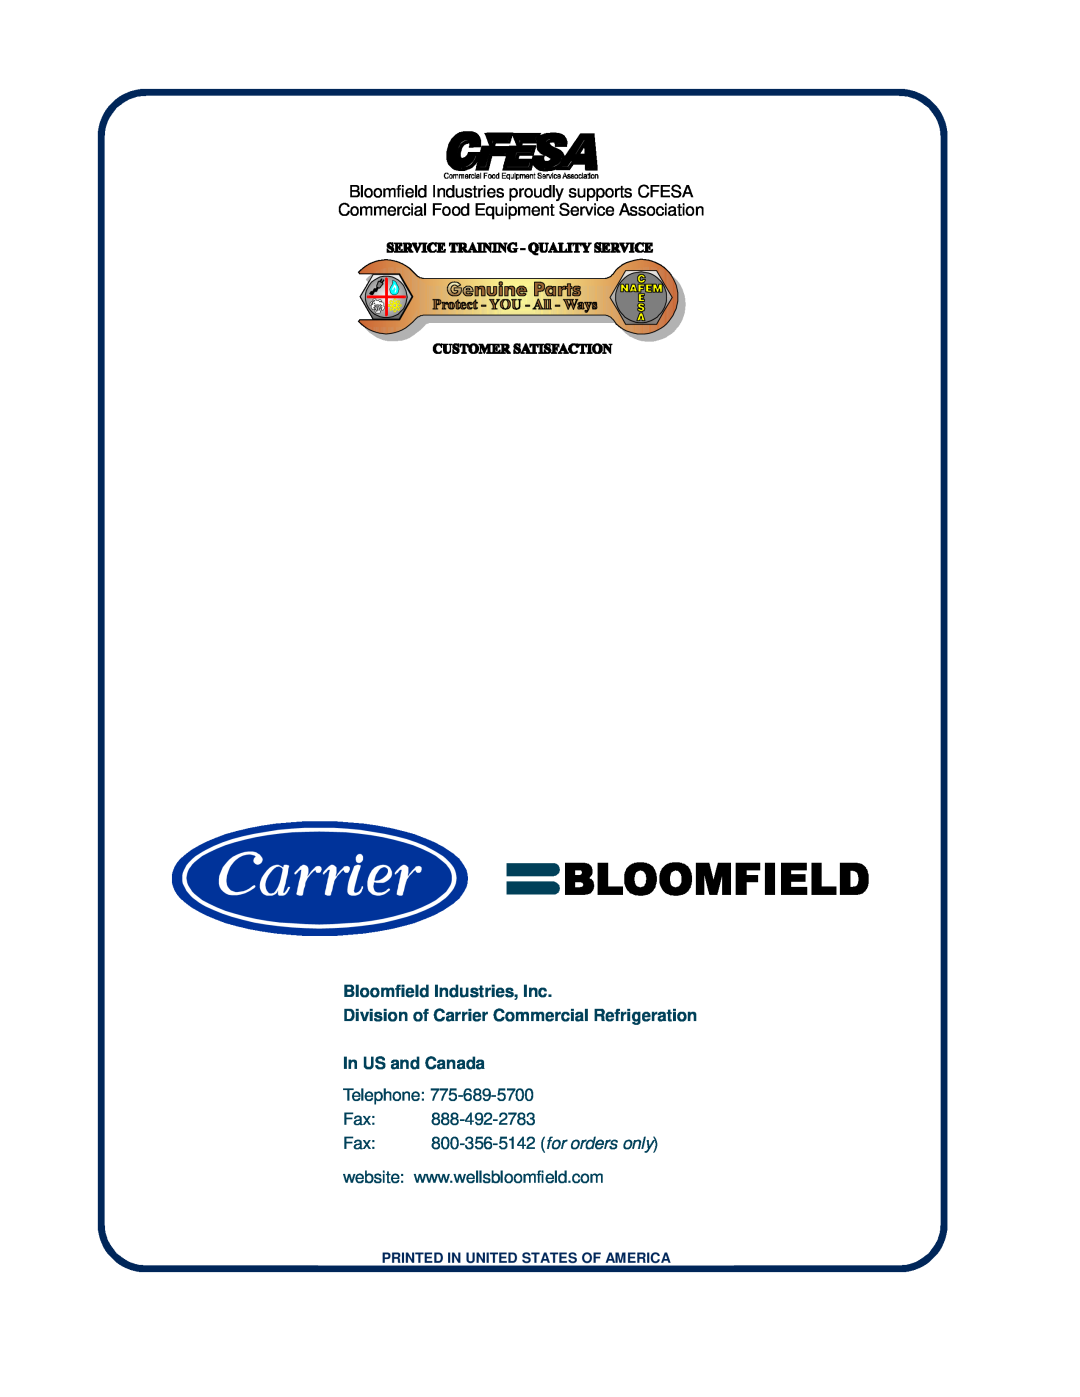 Bloomfield 2080, 2088 Bloomfield Industries, Inc, Division of Carrier Commercial Refrigeration In US and Canada, Telephone 